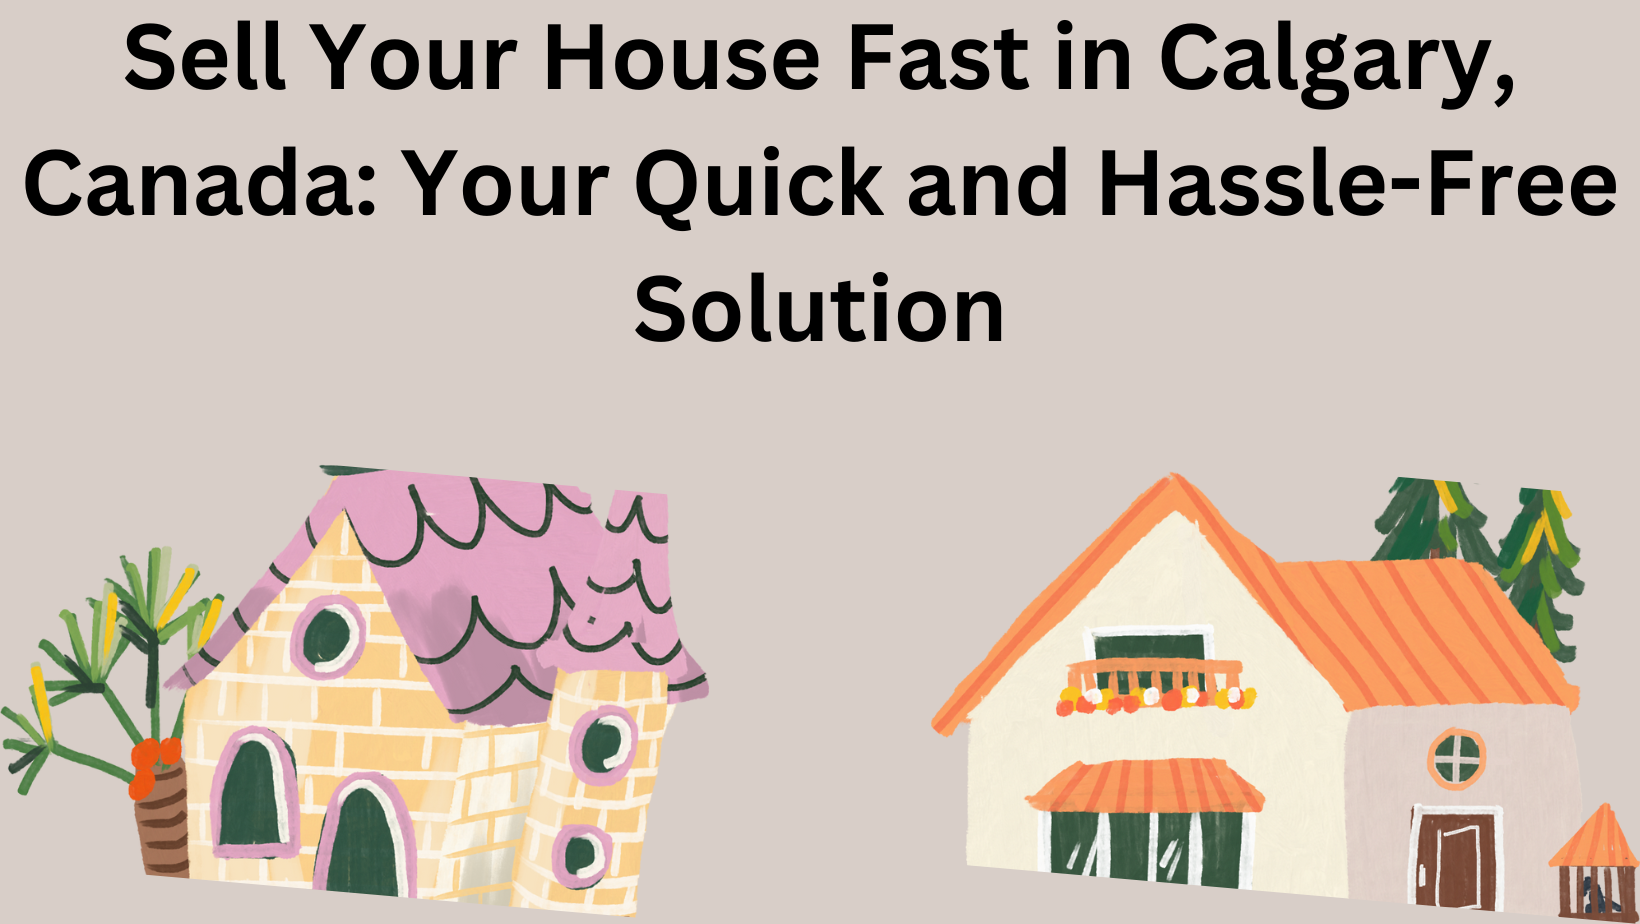 Sell Your House Fast in Calgary,
Canada: Your Quick and Hassle-Free
Solution

COON

0 ow “it %
Al -_ 7

7 @

i @
= 1